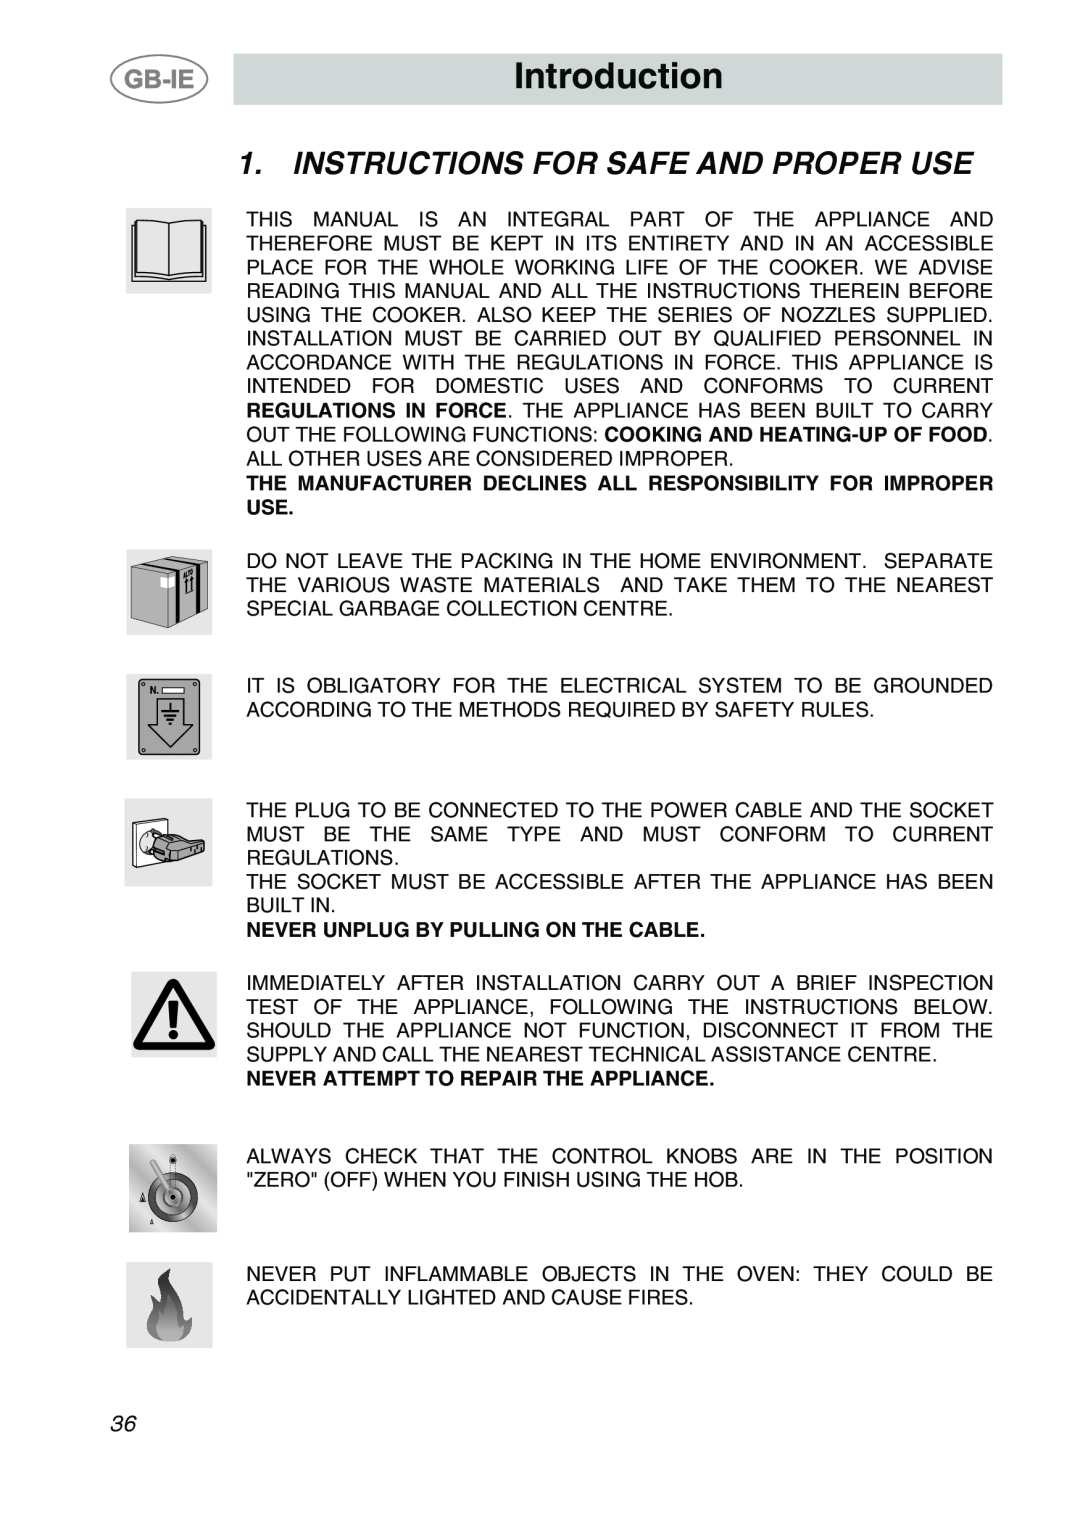 Smeg A1-6 manual Introduction, Instructions For Safe And Proper Use, Never Unplug By Pulling On The Cable 